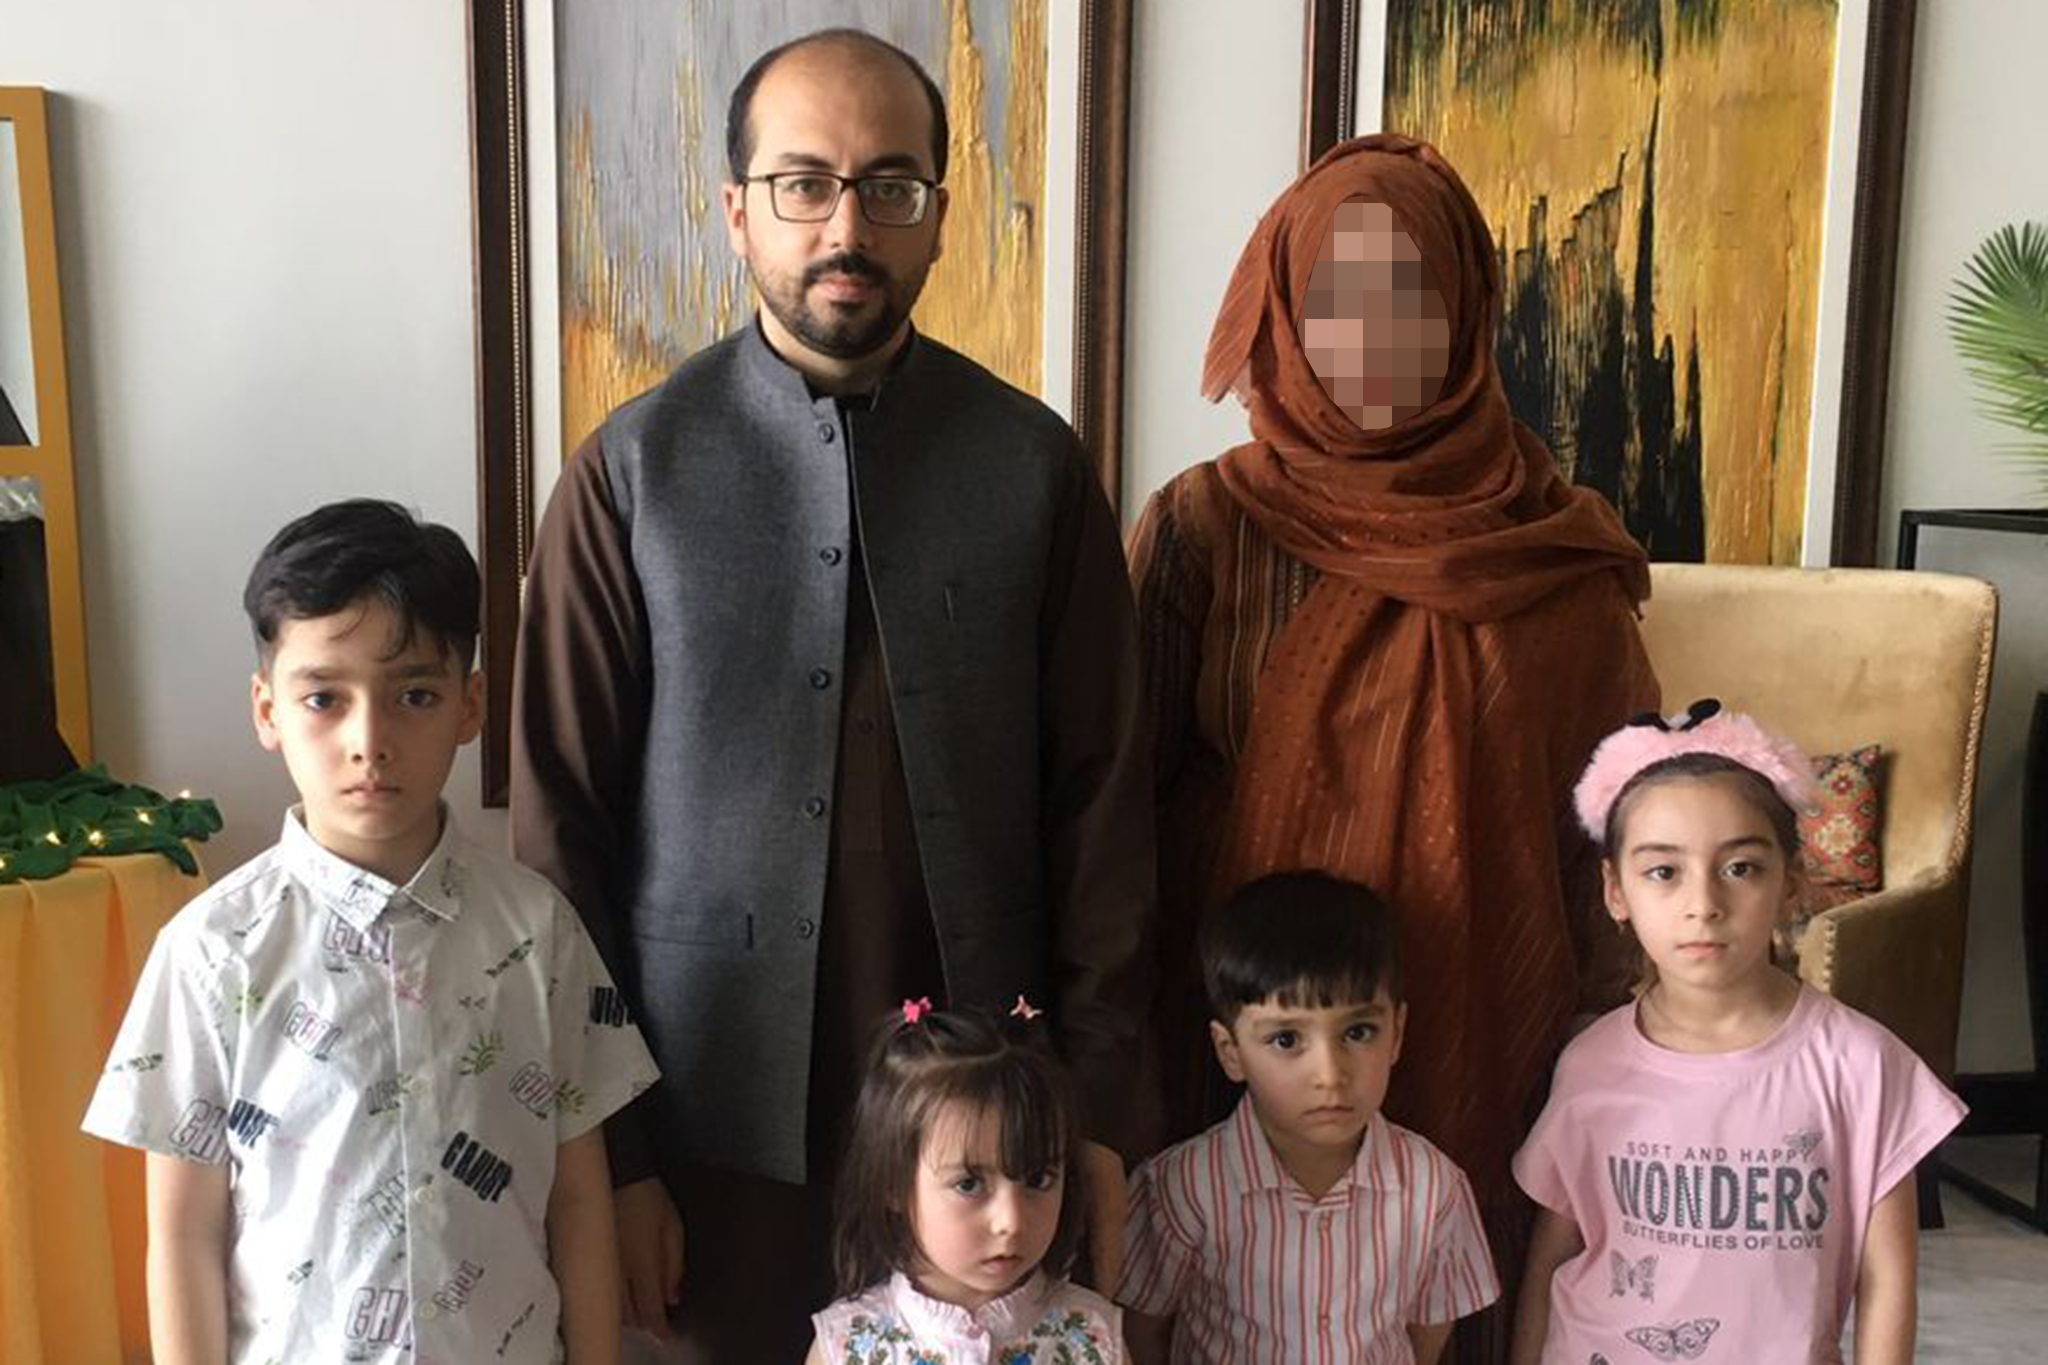 Mohammad Zaker Nasery with his wife and four children aged 9, 6, 5 and 3.